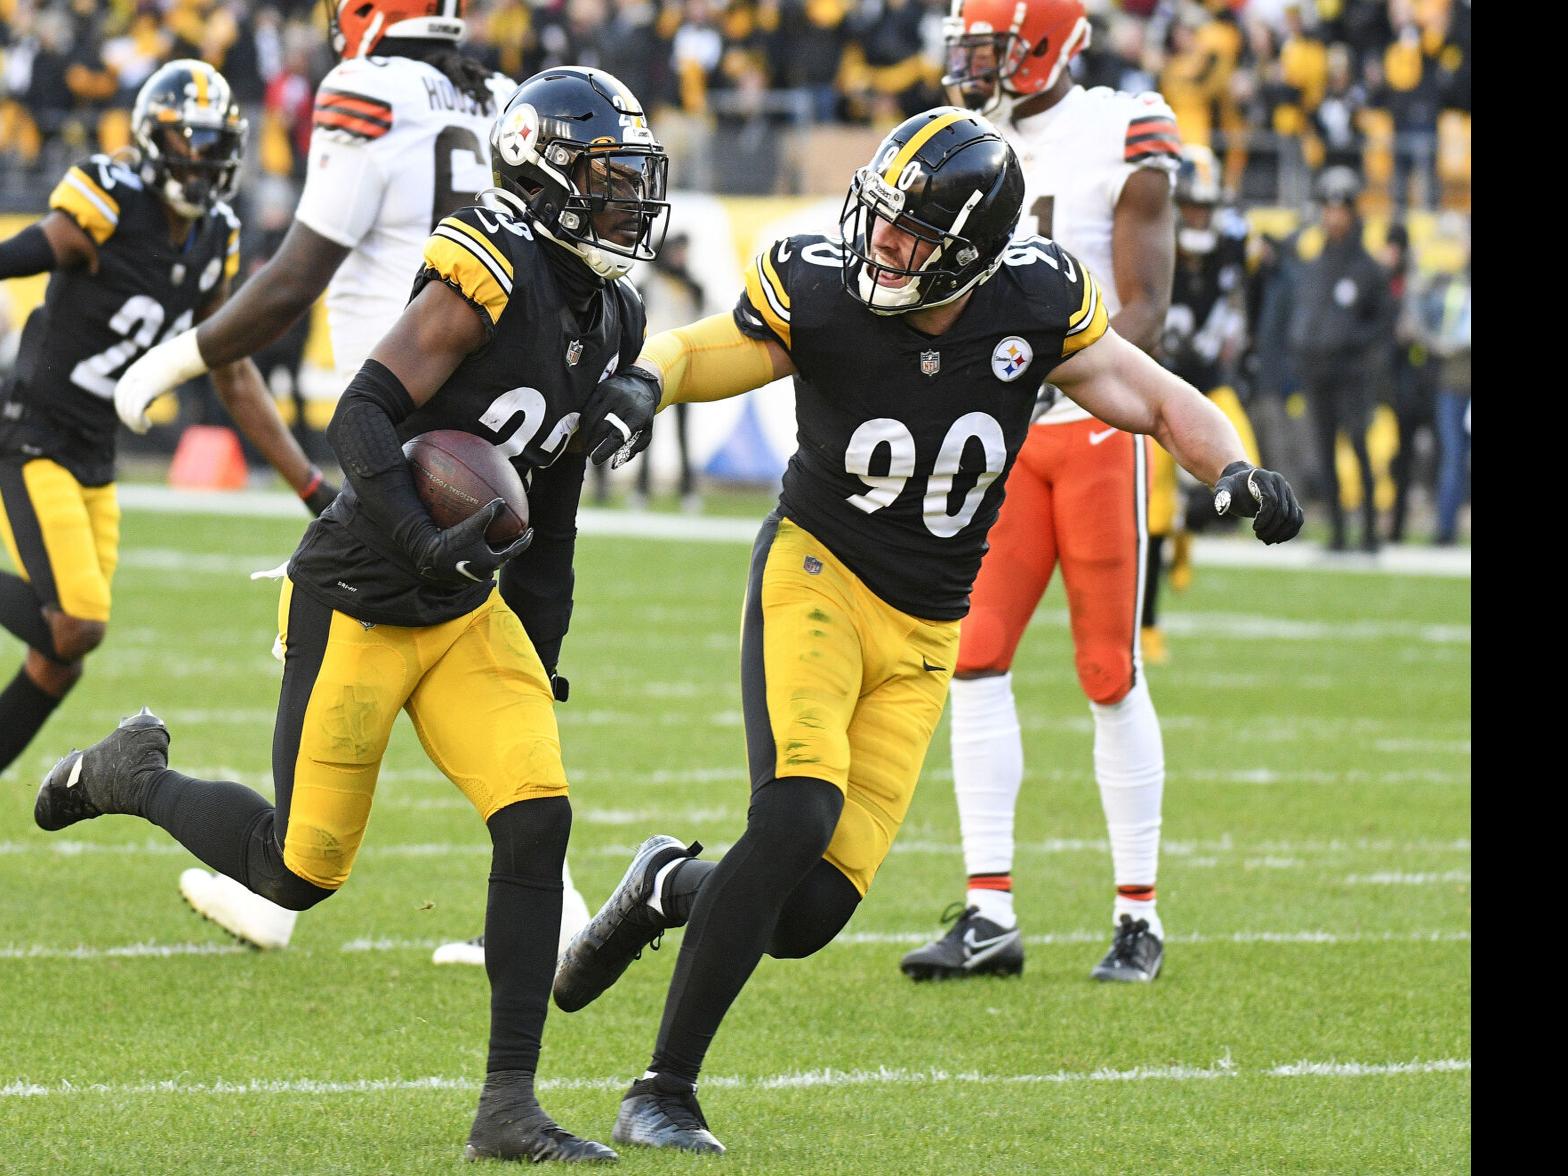 Best Bets & Promo Codes for the Browns vs. Steelers Monday Night